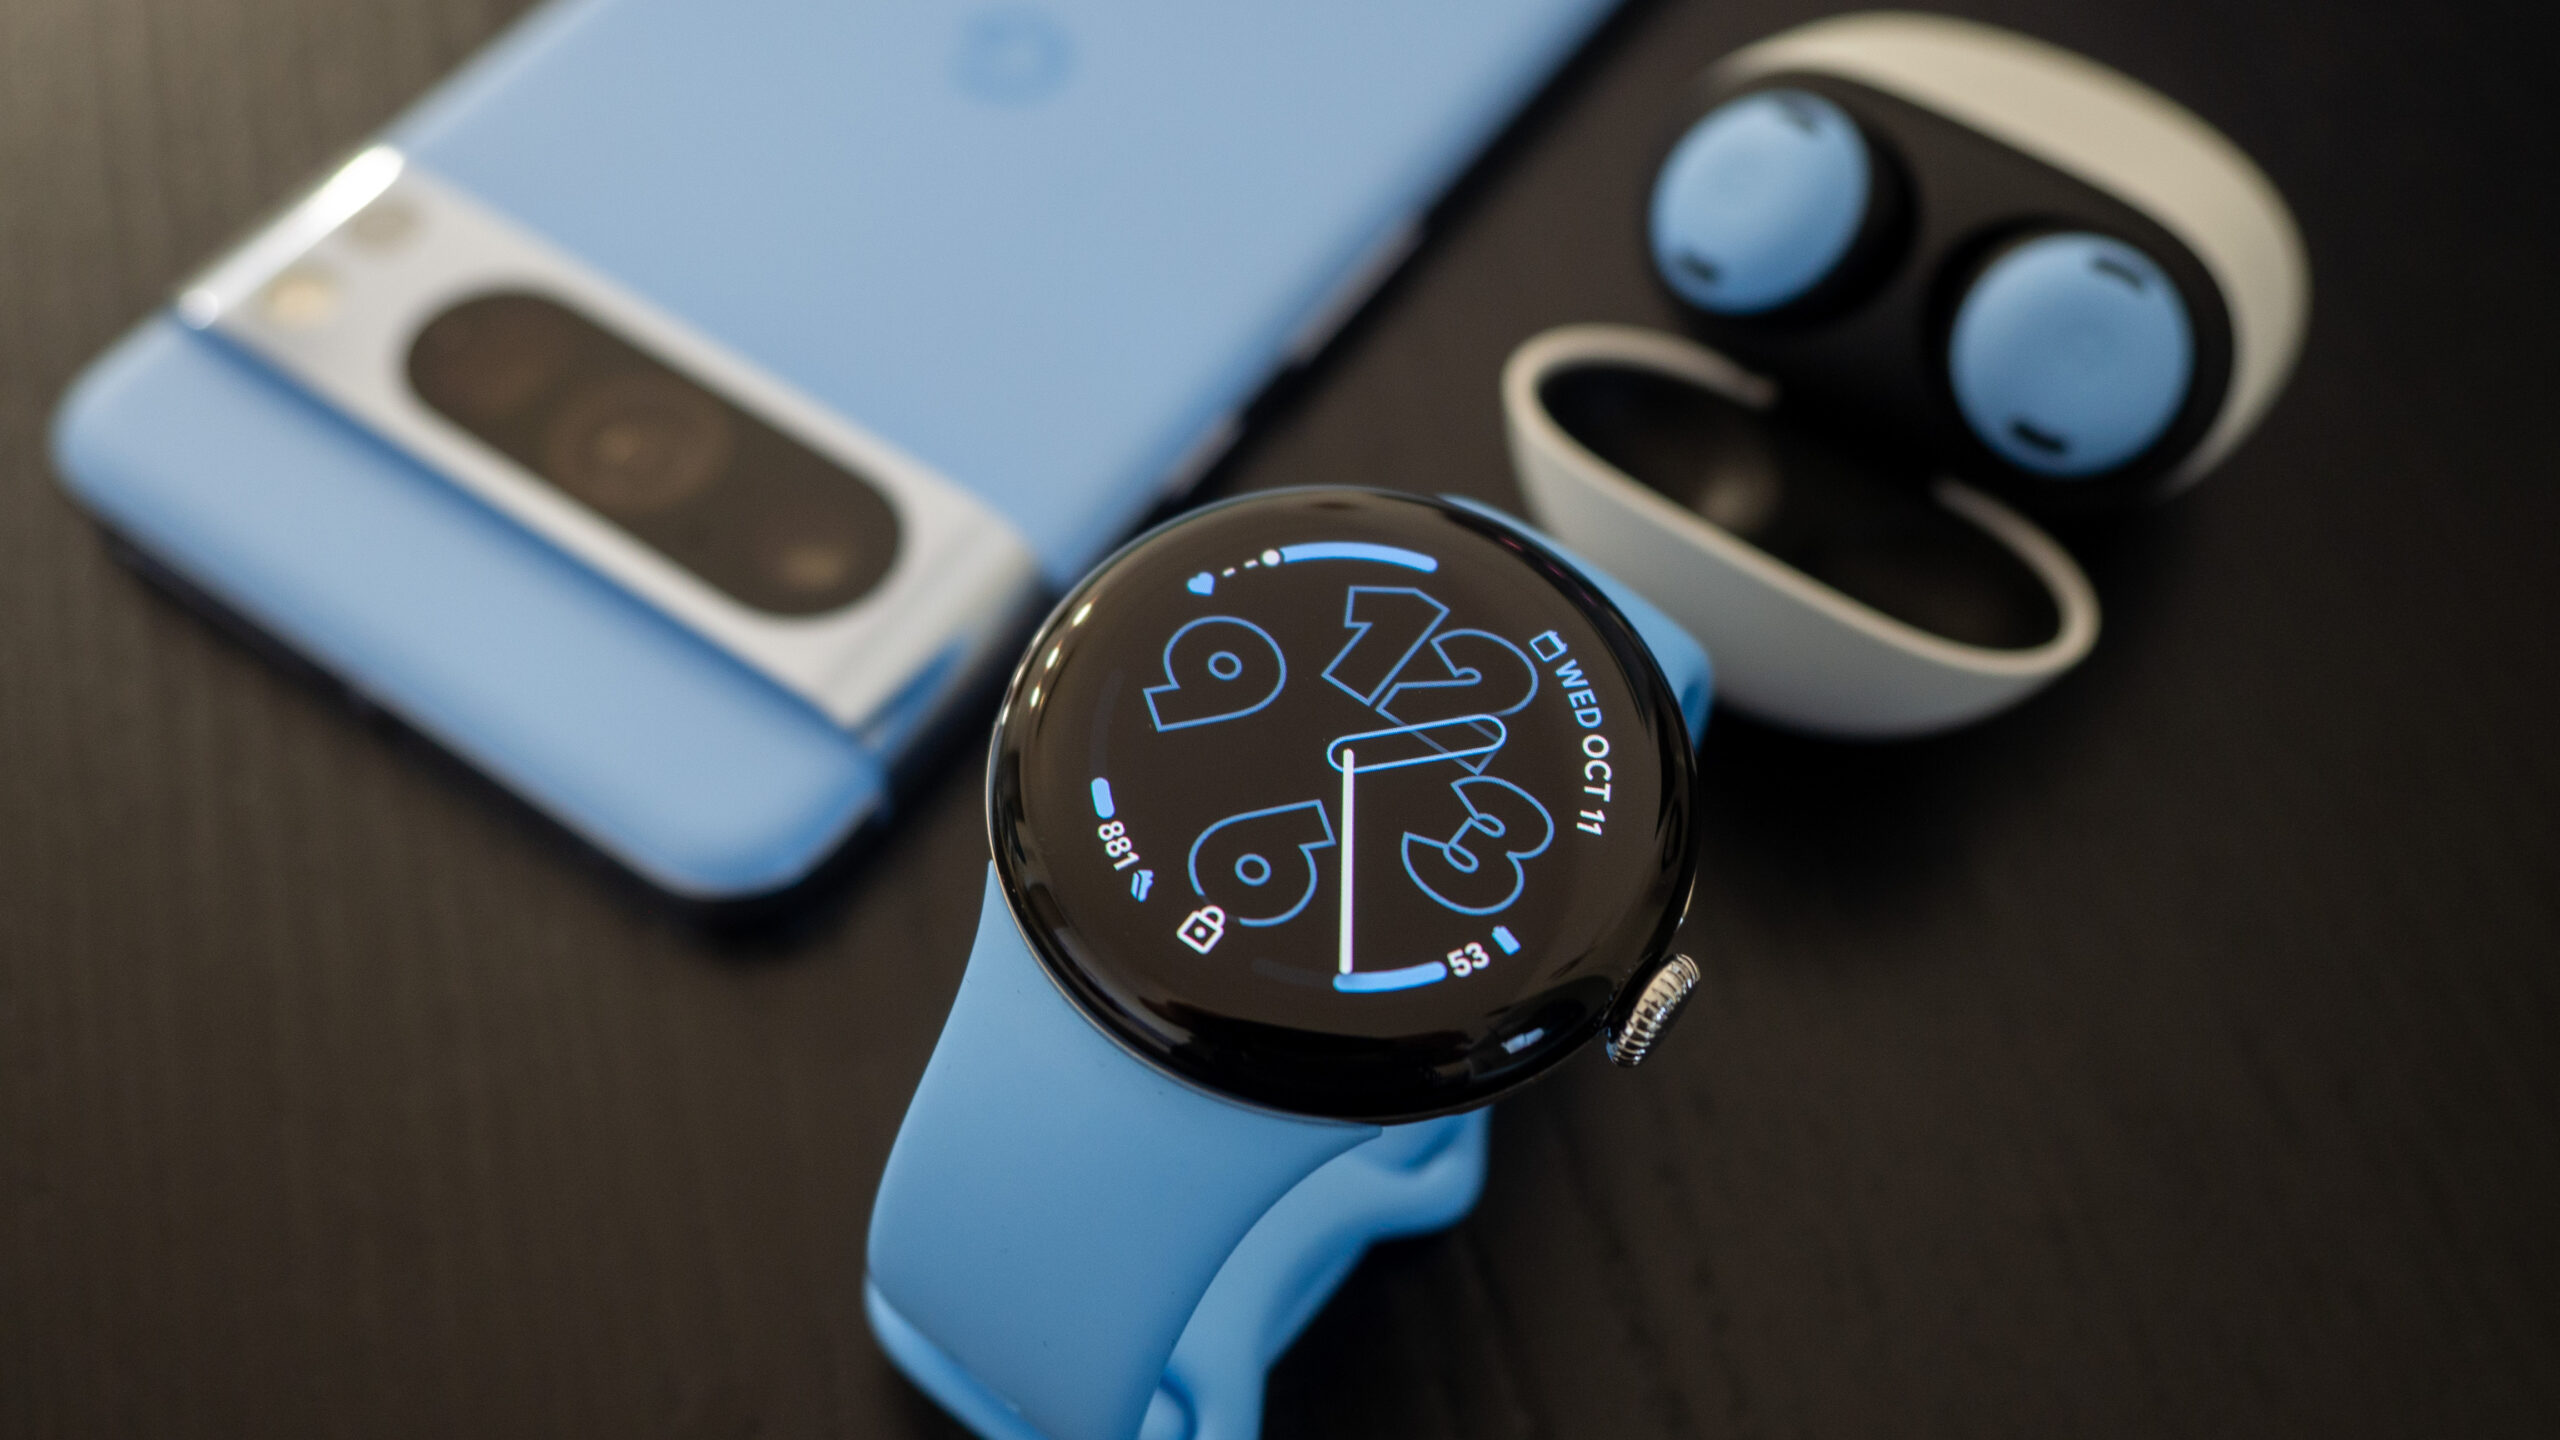 Wear OS smartwatch users can soon sync app permissions with their phone